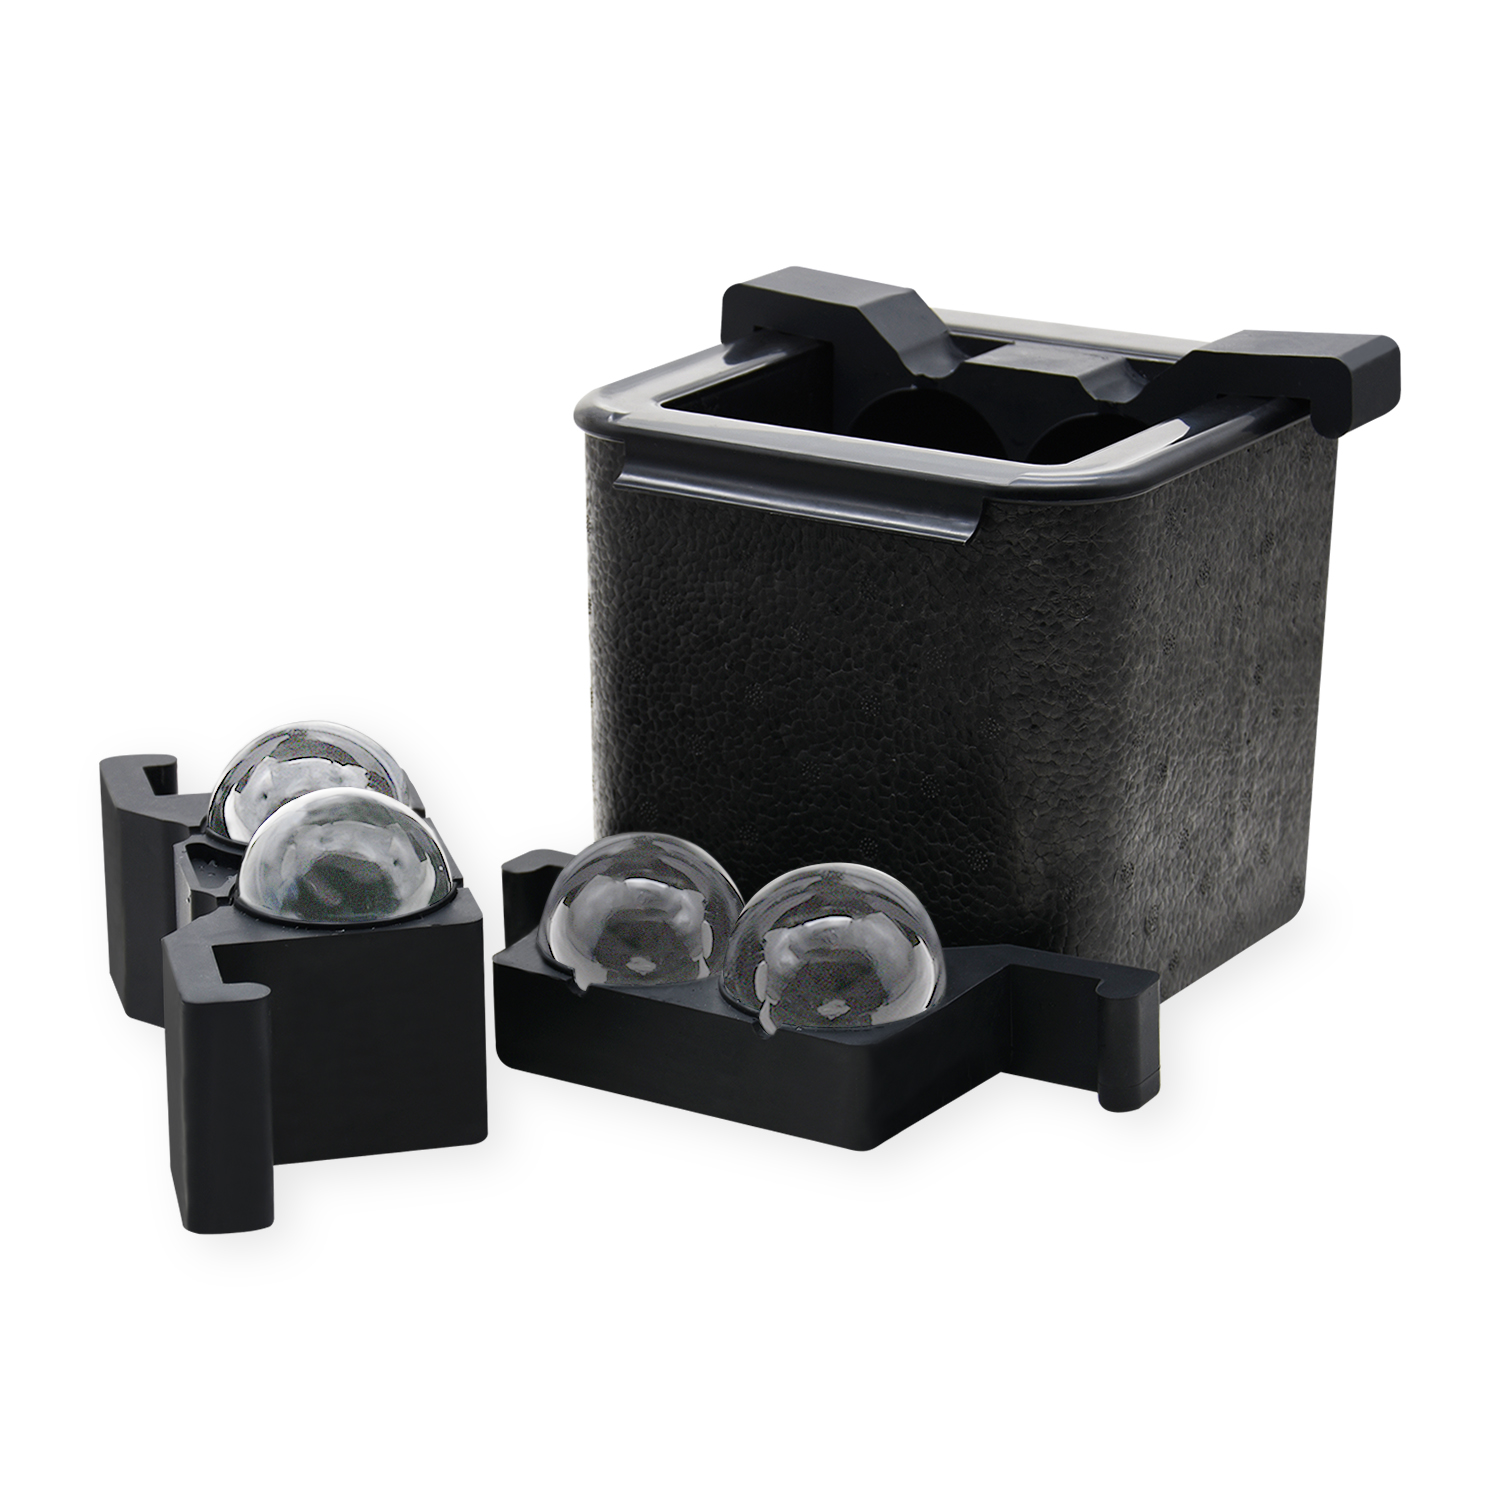 King Cube Trays for Clearsphere System – The Whiskey Ball